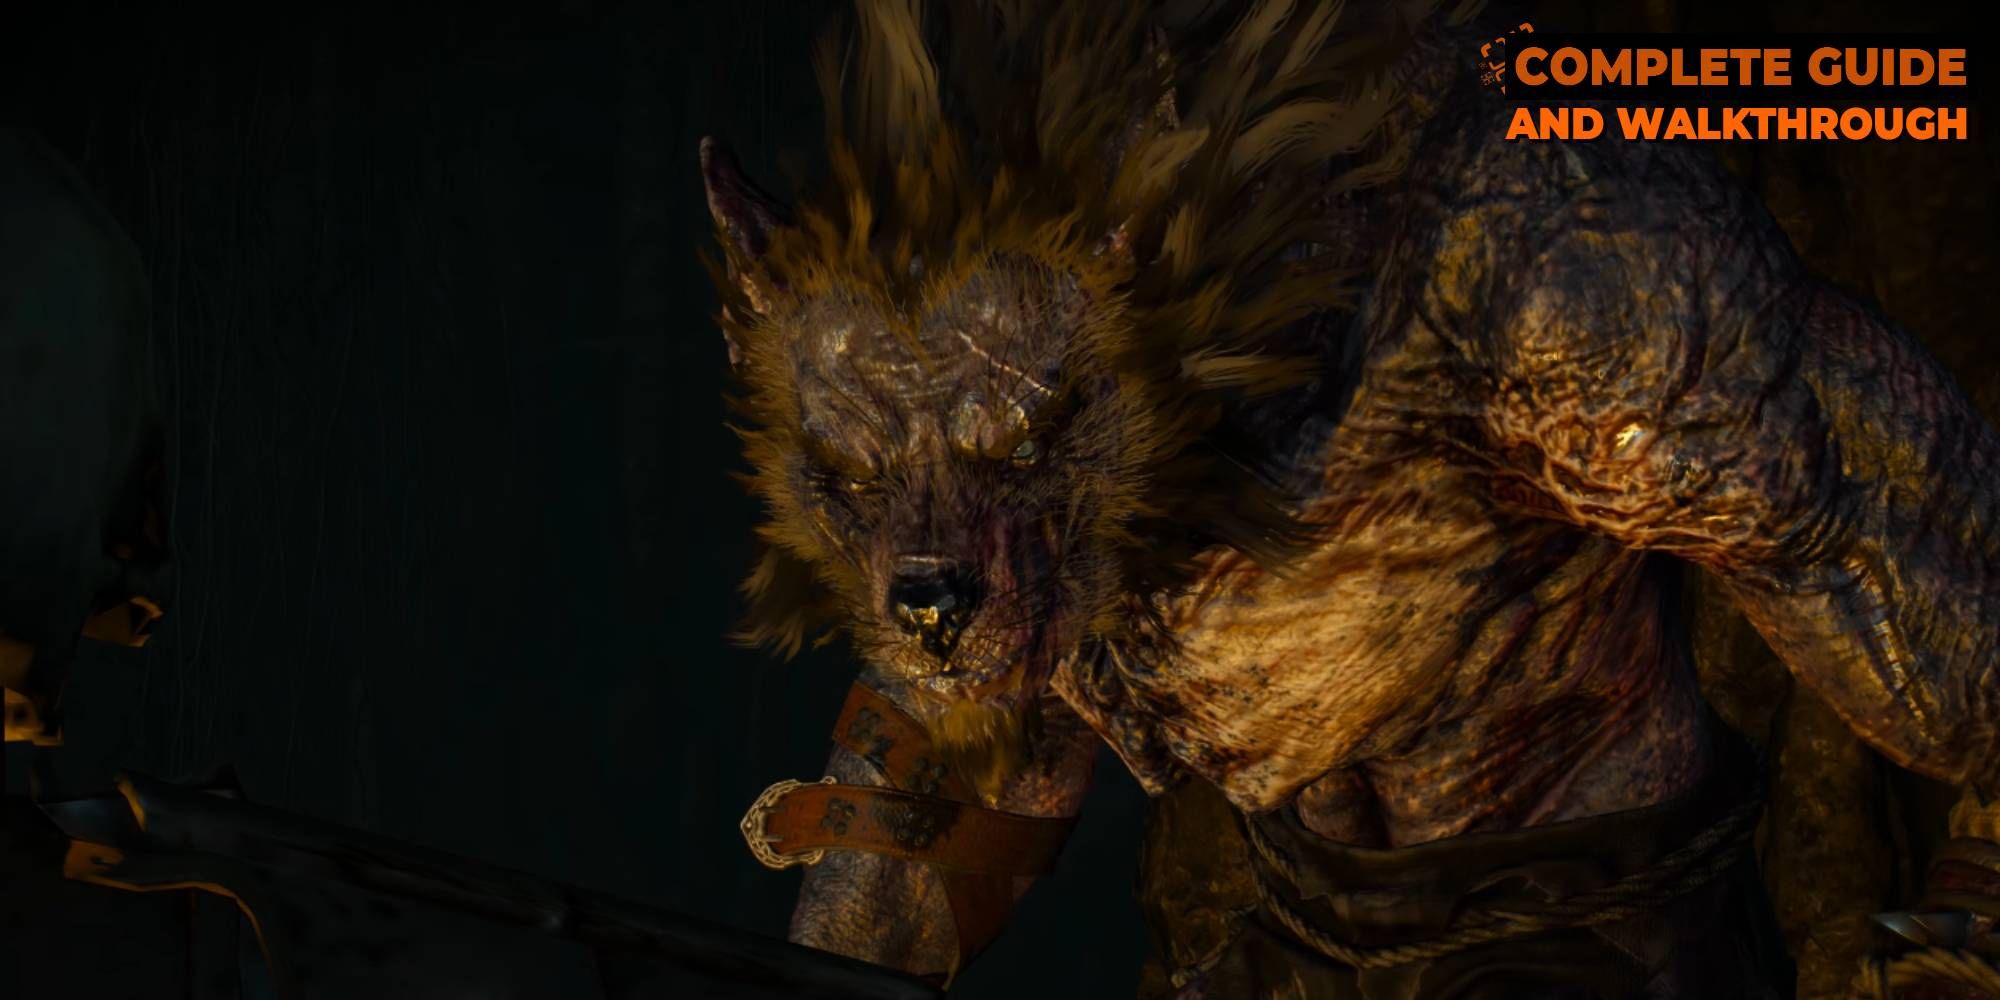 Morkvarg the werewolf in The Witcher 3